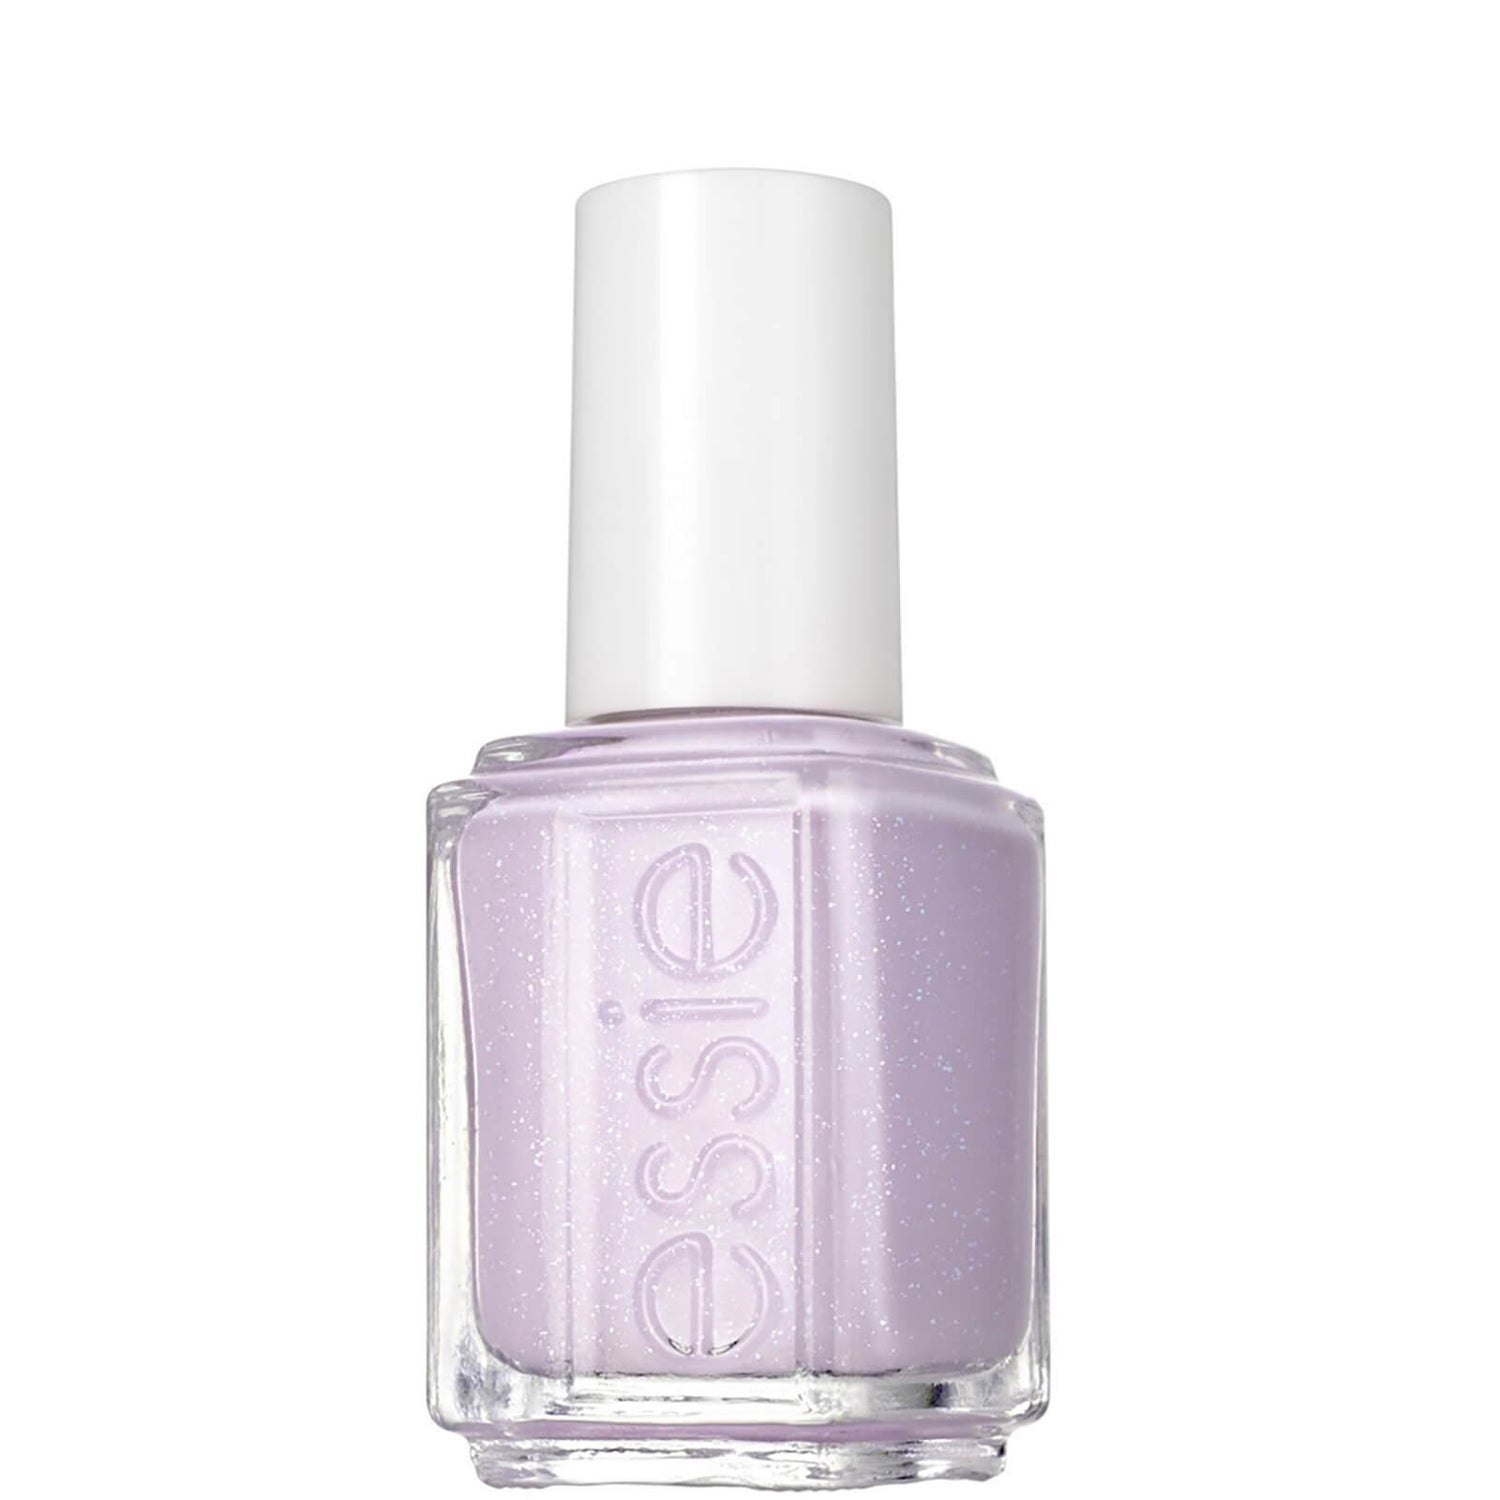 essie To Buy Or Not To Buy Nagellack 15ml